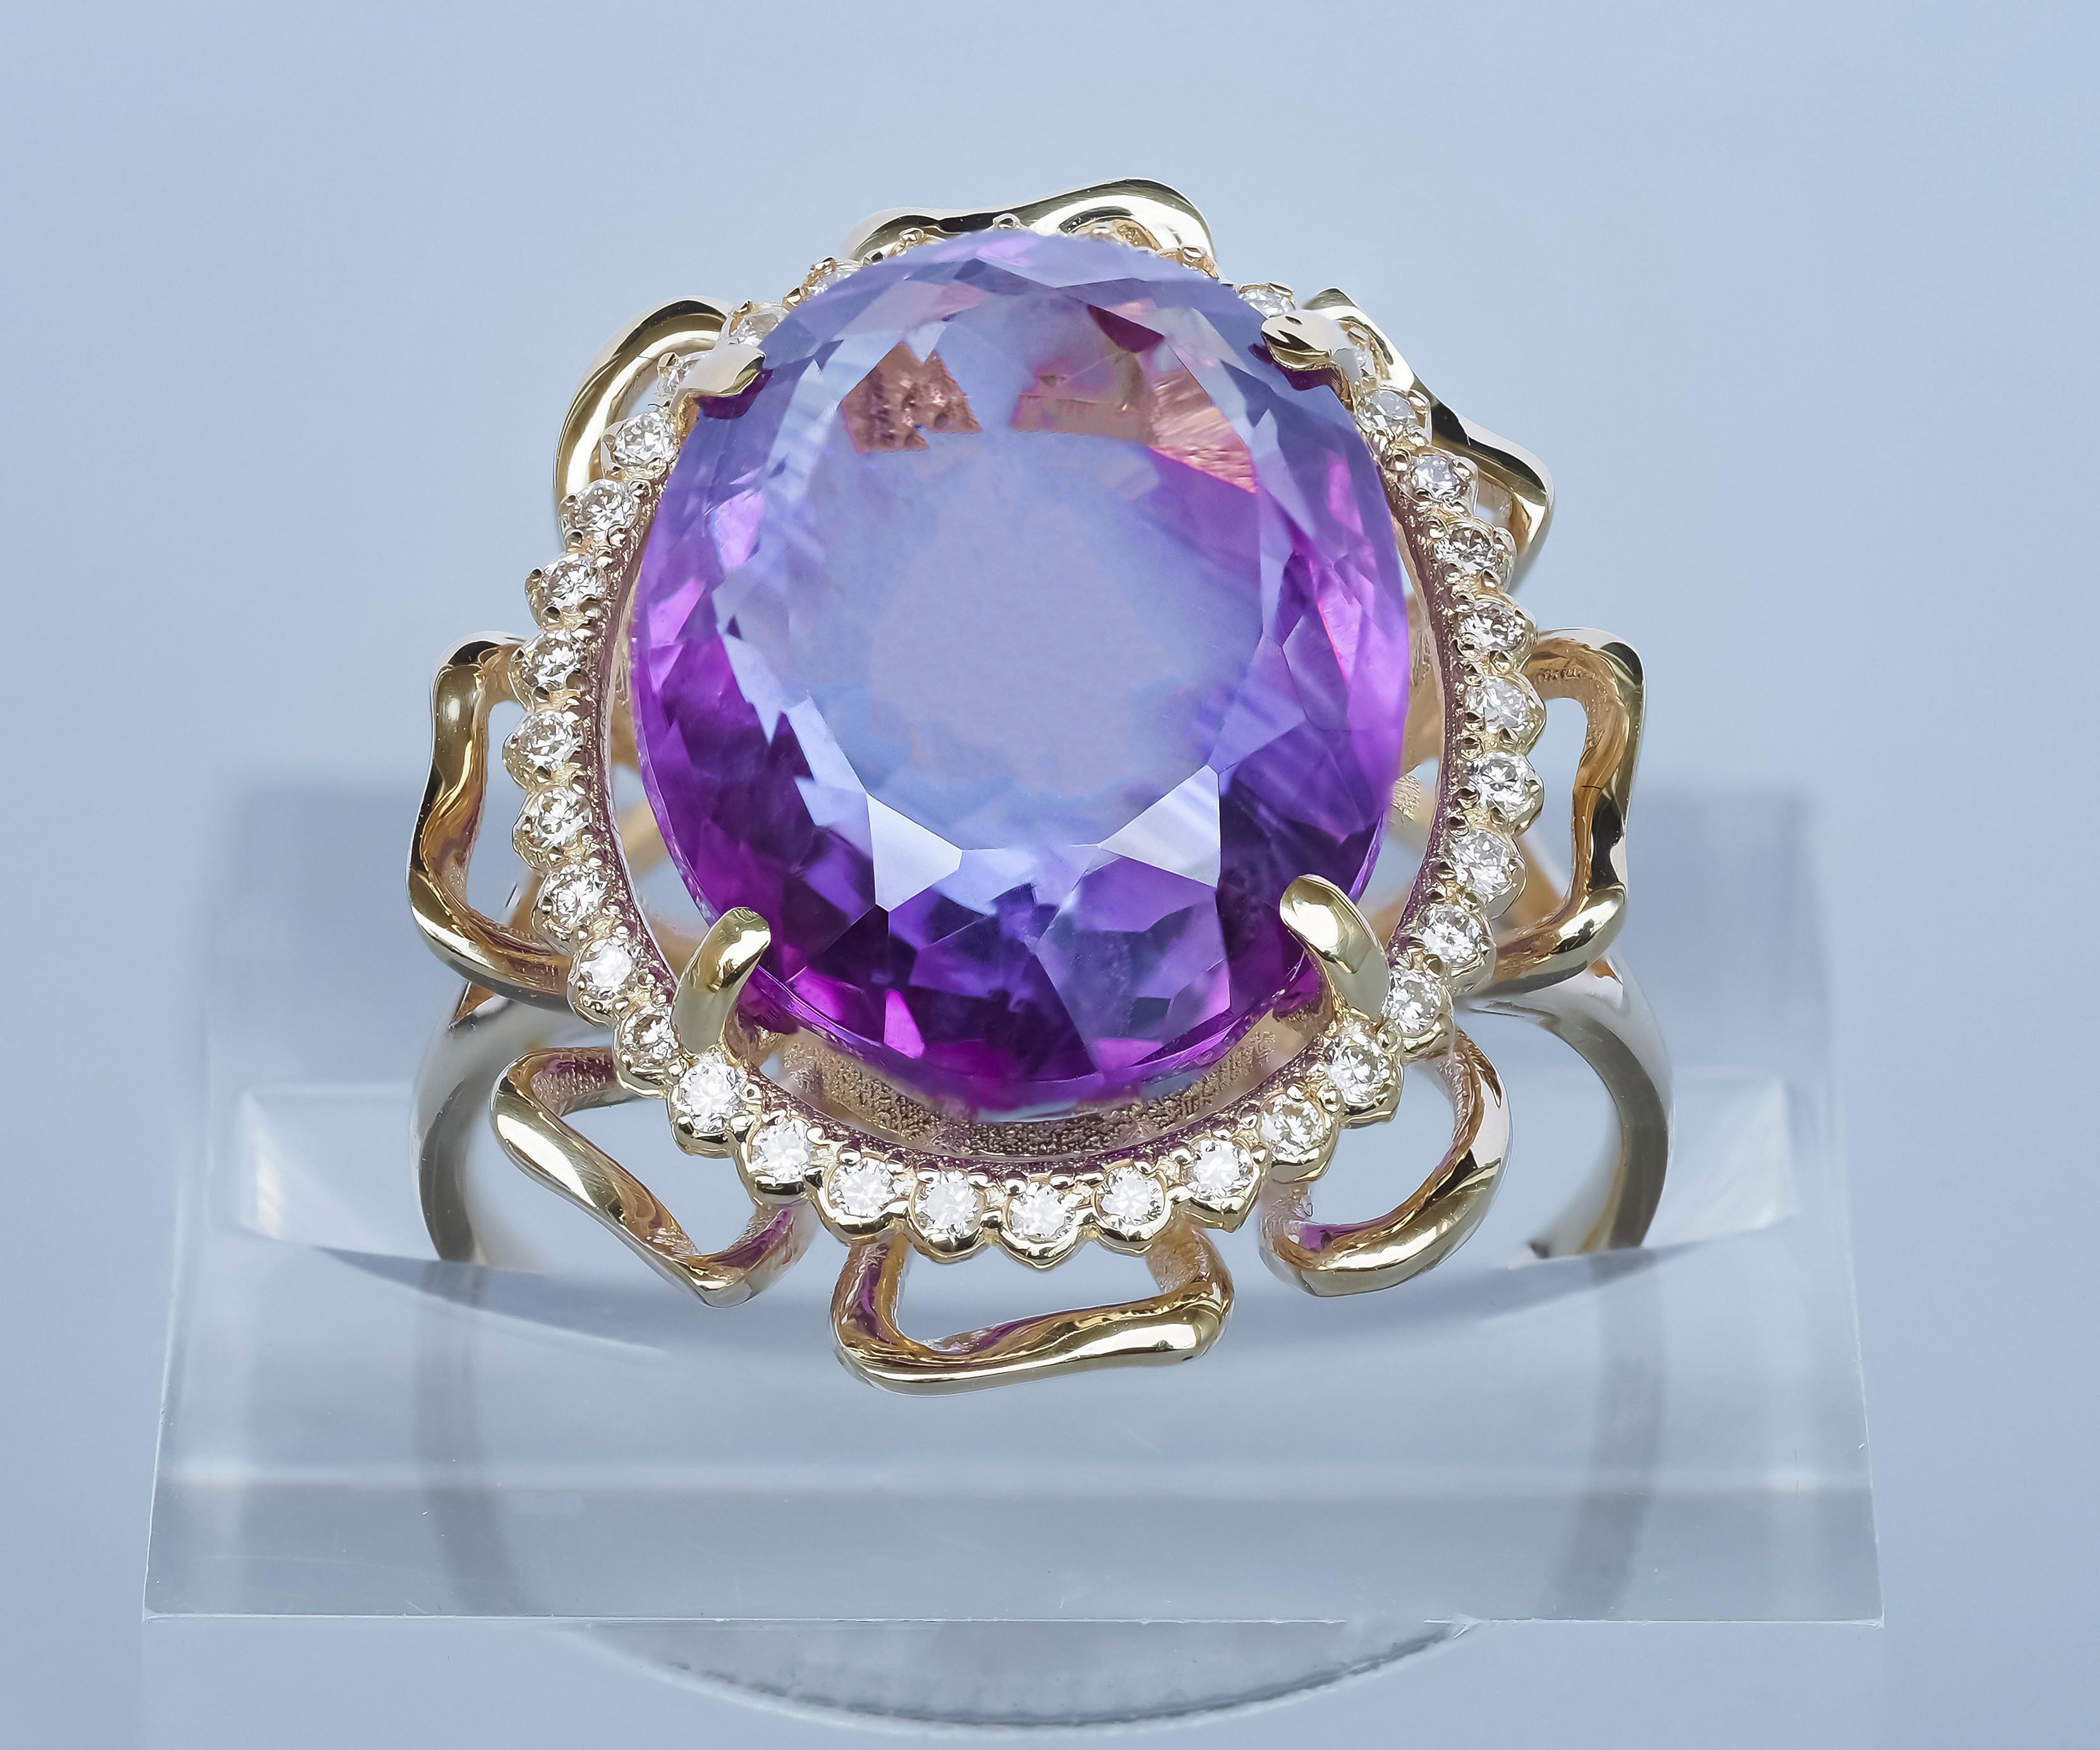 For Sale:  14 Karat Gold Flower Ring with Amethyst and Diamonds 3